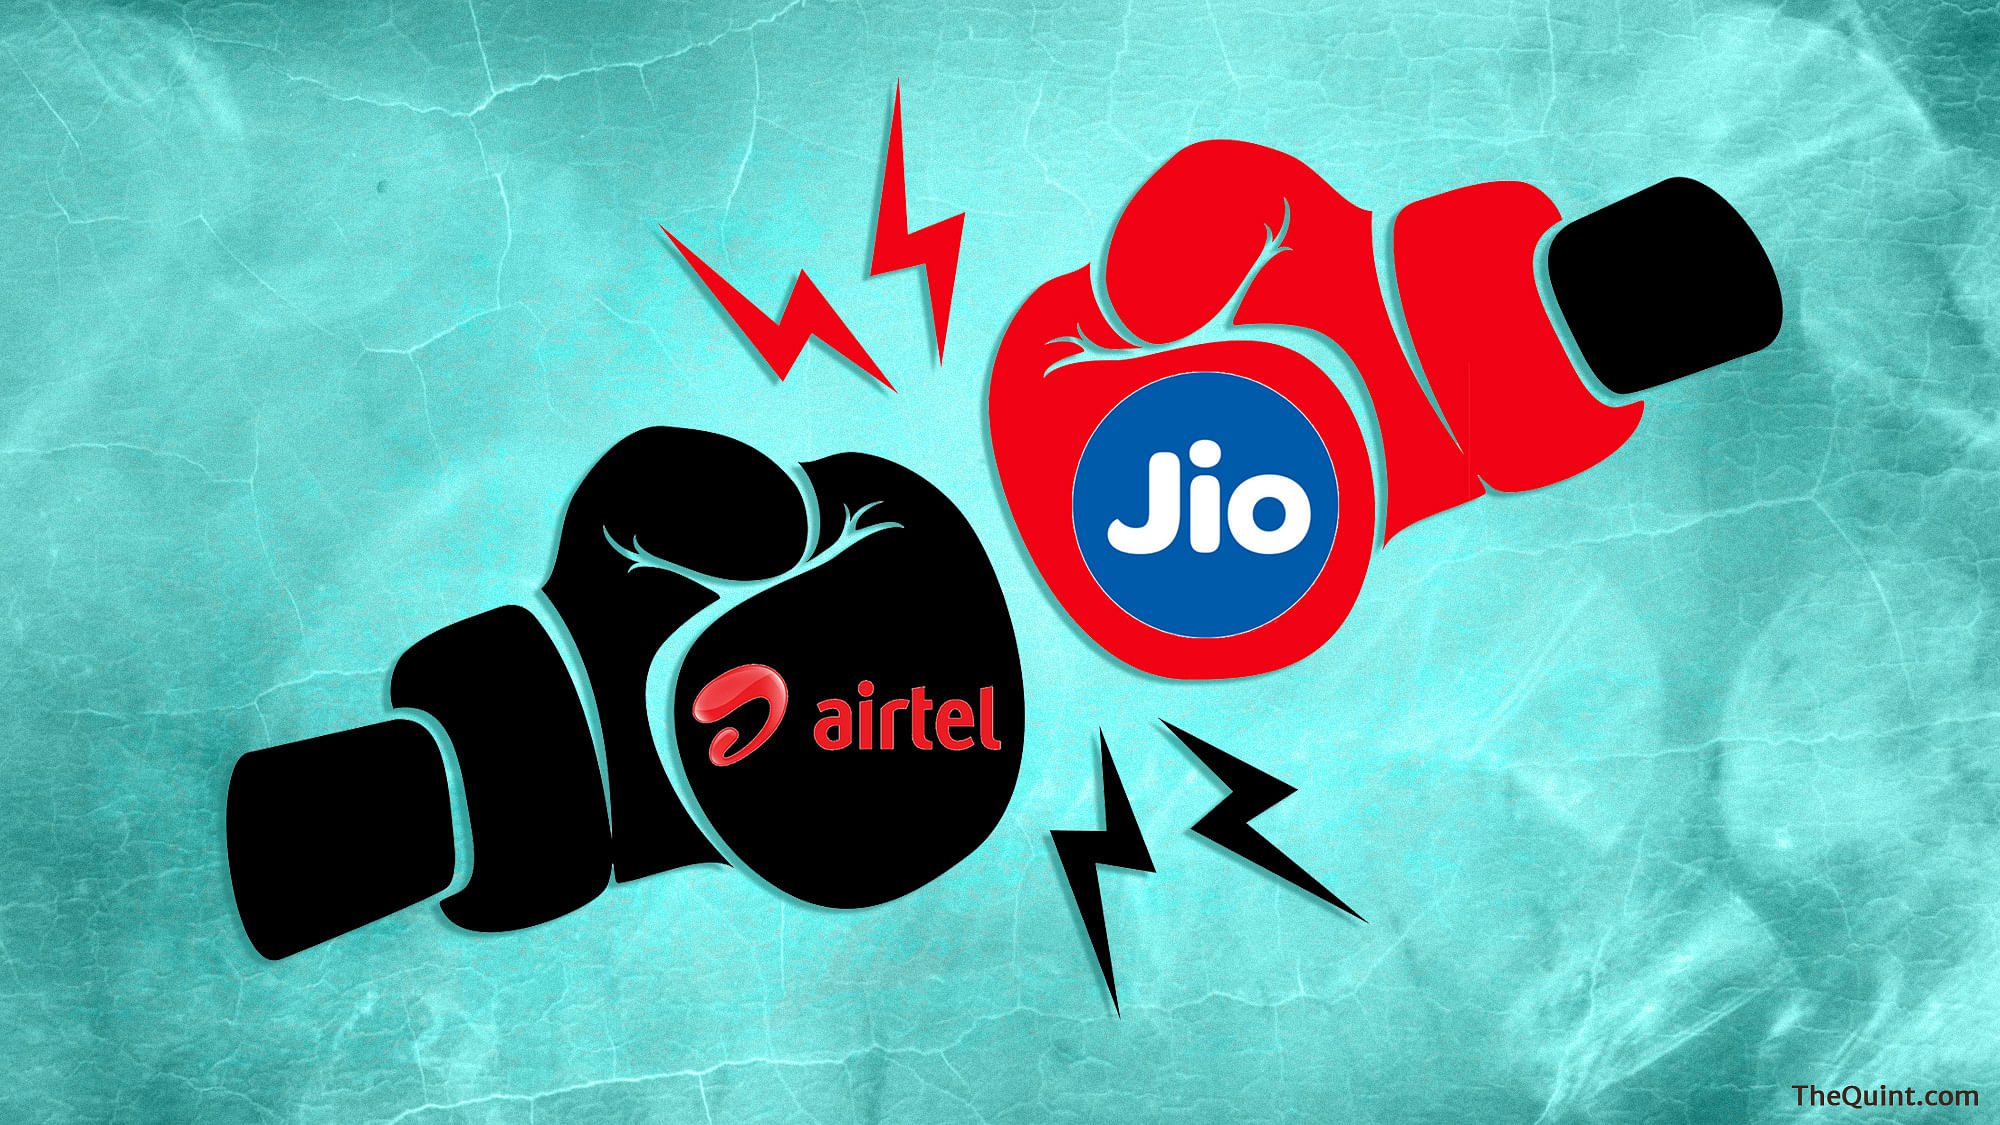 Reliance Jio vs Airtel – This battle is unlikely to end anytime soon.